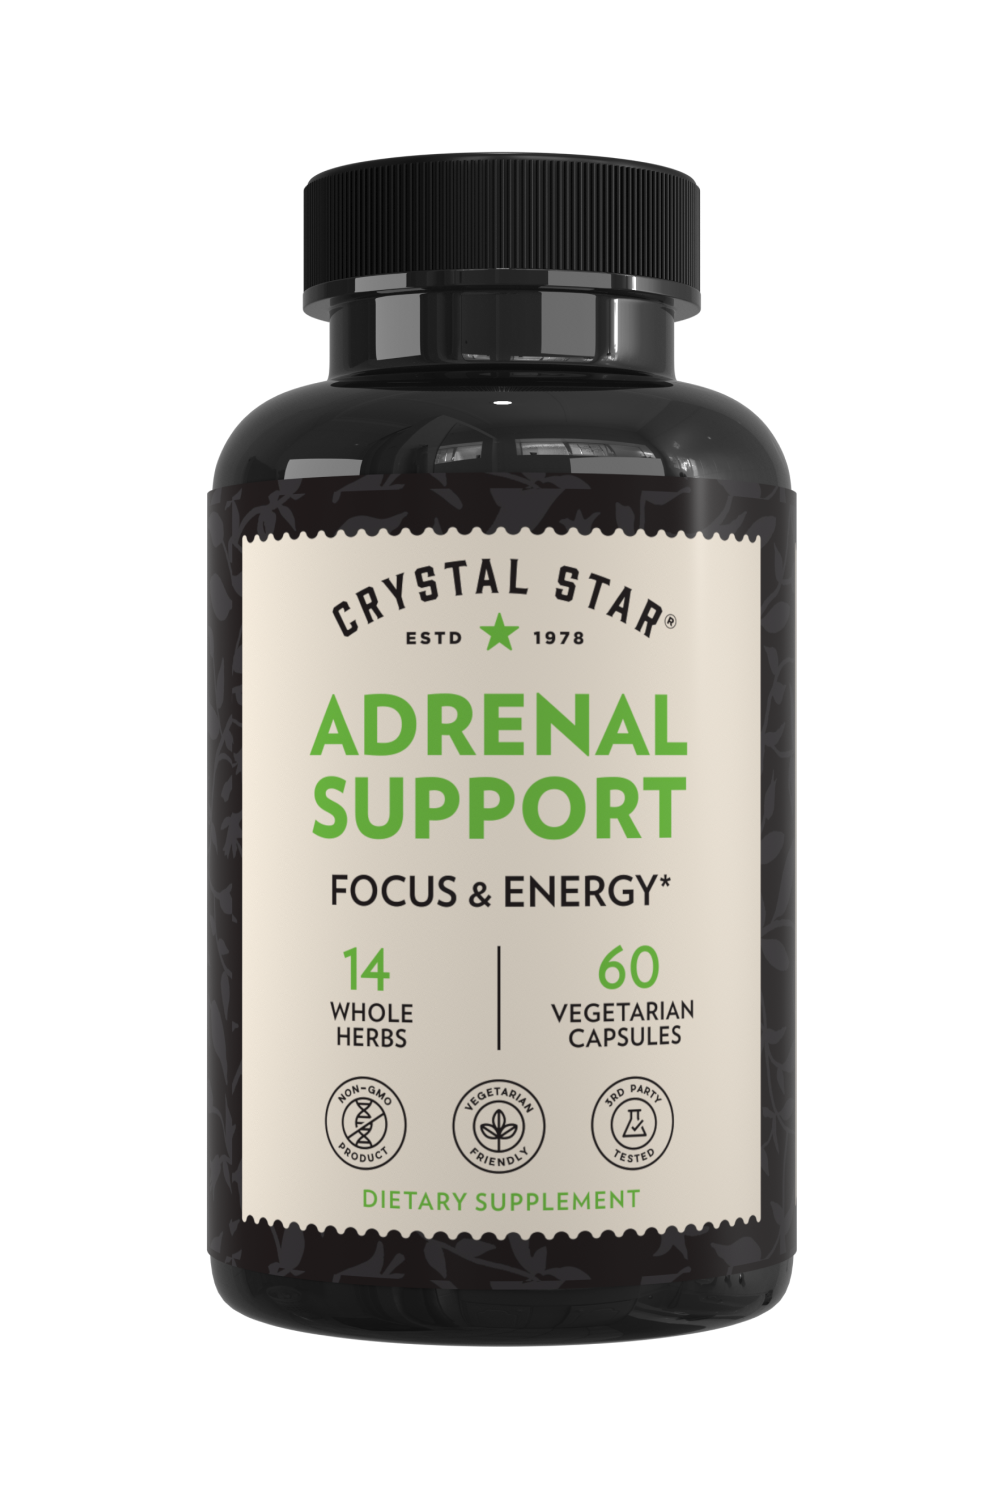 Crystal Star Adrenal Support supplement for focus and energy, Front Side